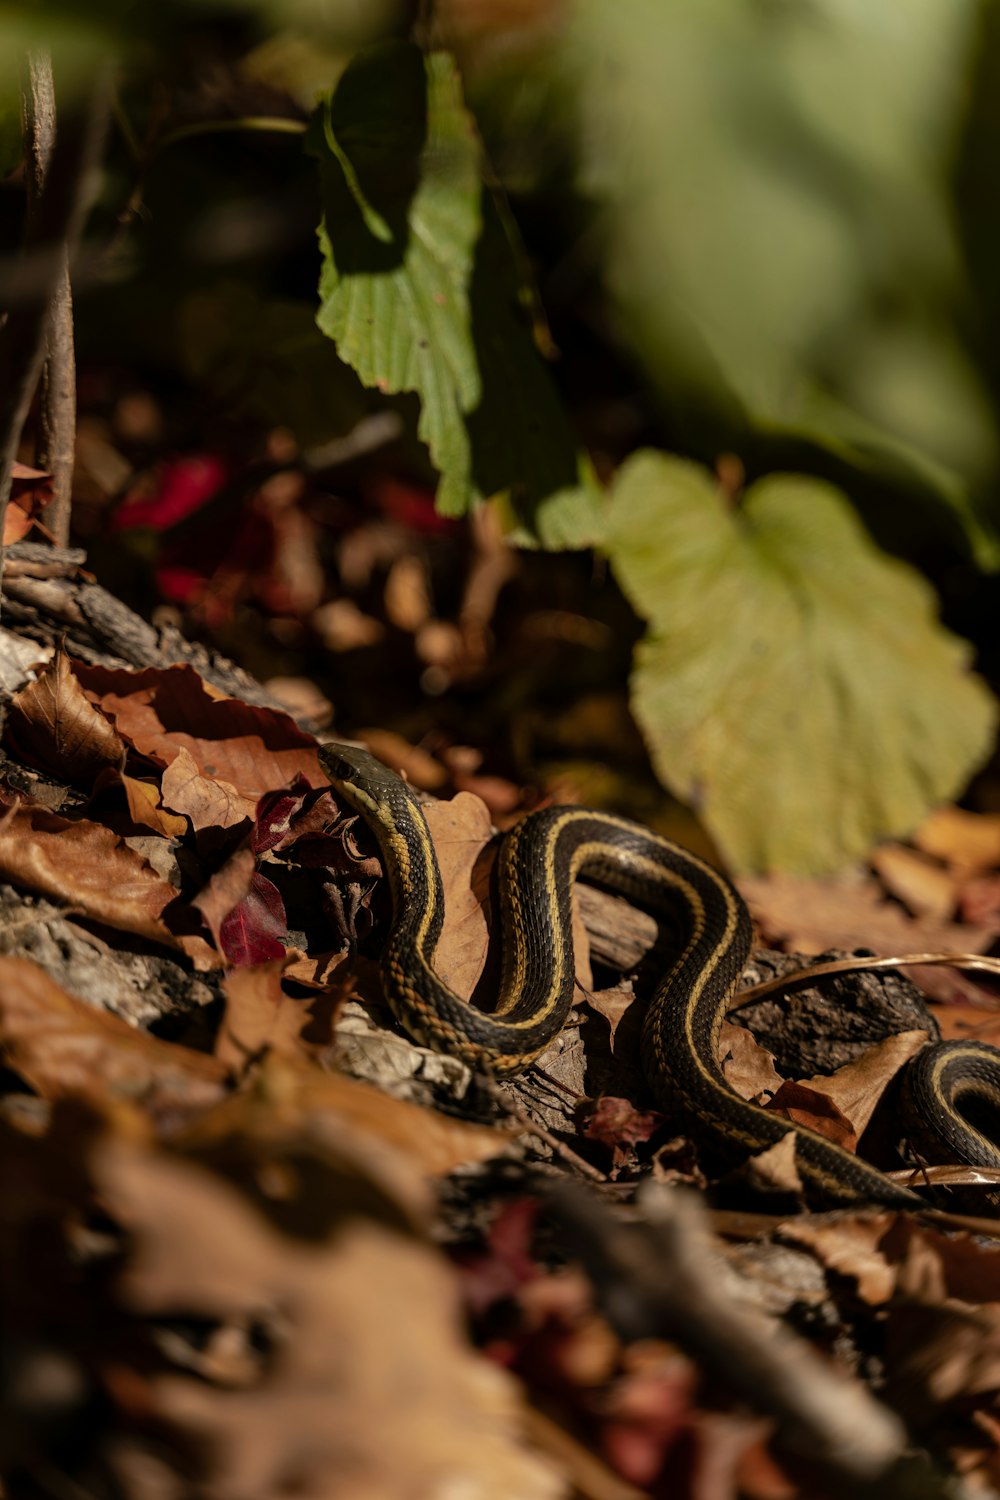 black and white snake on dried leaves